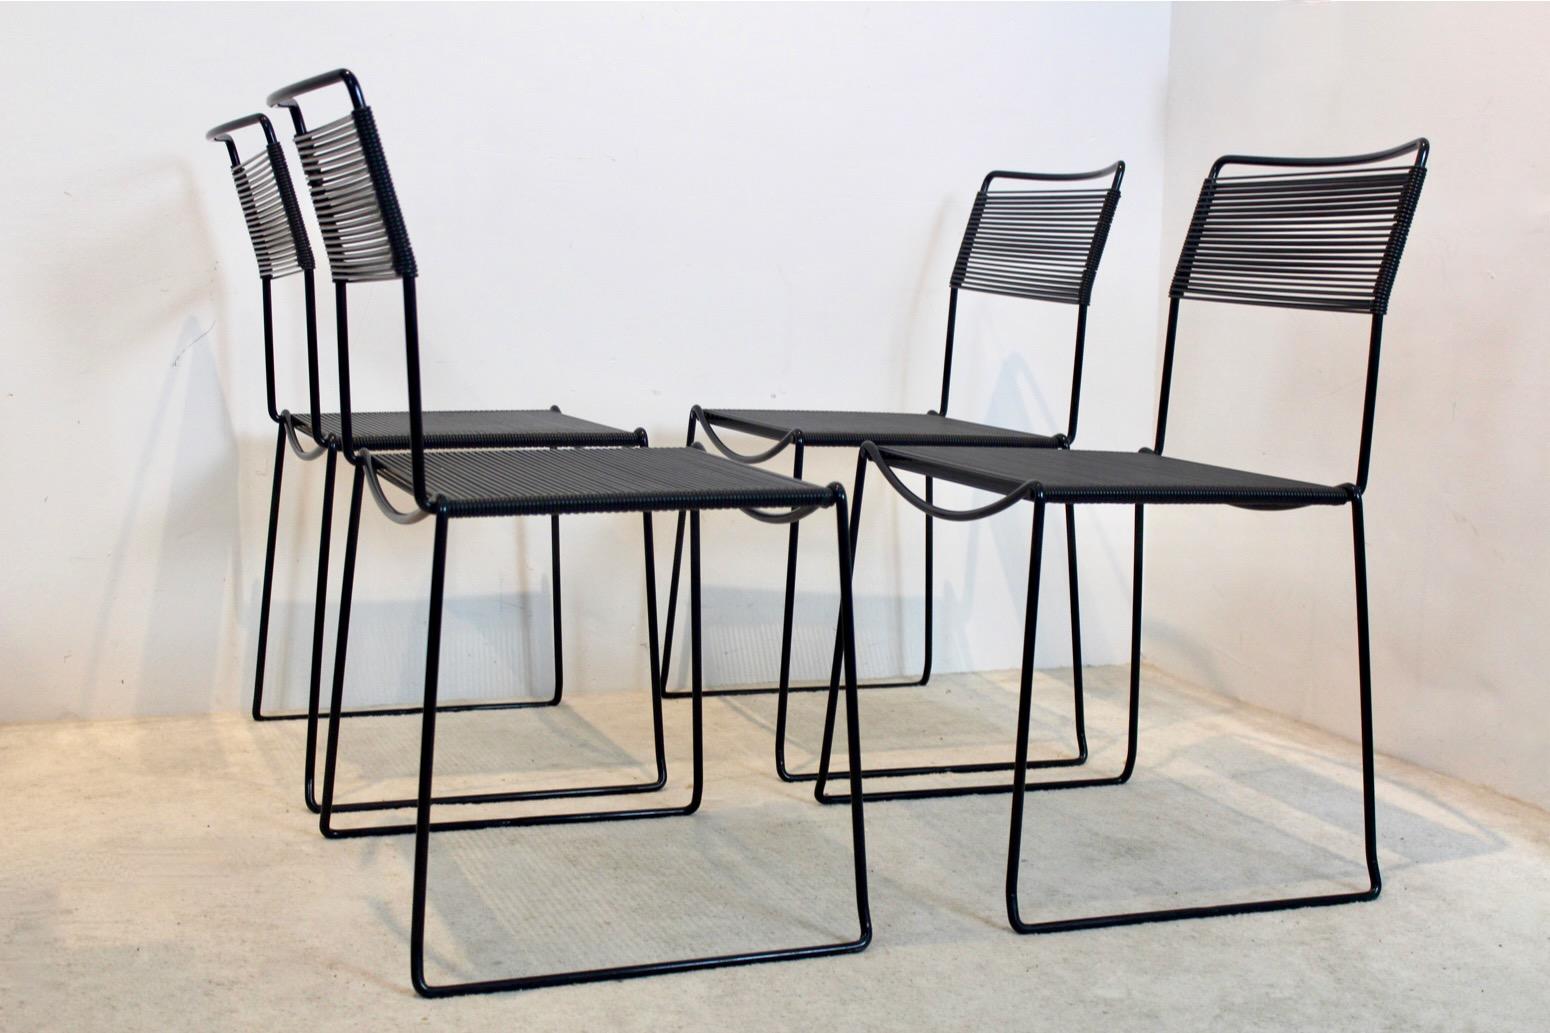 Set of Spaghetti Chairs by Giandomenico Belotti for Alias, Italy In Good Condition For Sale In Voorburg, NL